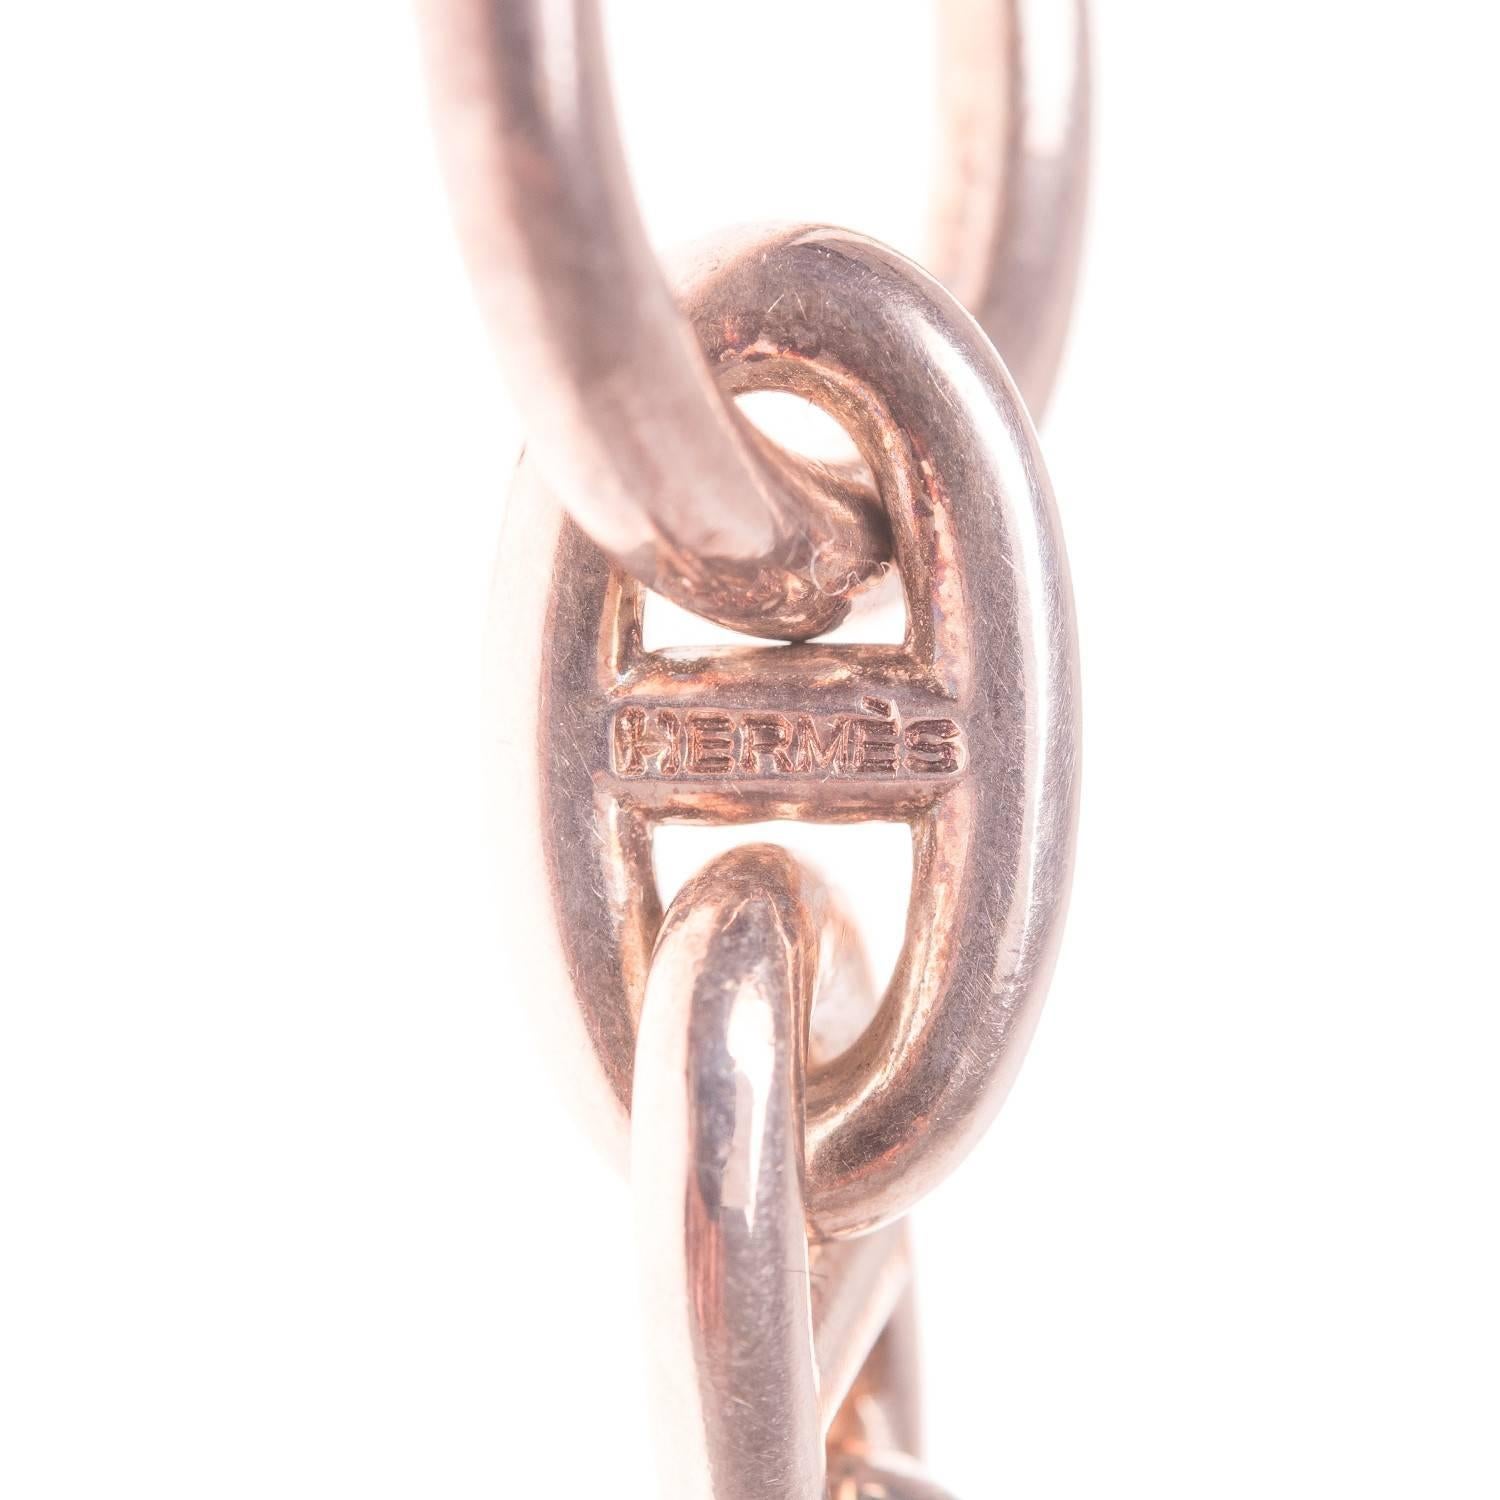 Hermes Chaine d'Ancre sterling silver chain link bracelet size MM with 17 links size 0.6in x 0.3in.

Origin: France

Condition: Mint

Accompanied by: Hermes box, leather case

Size: MM

Measurements: Link size:  .6